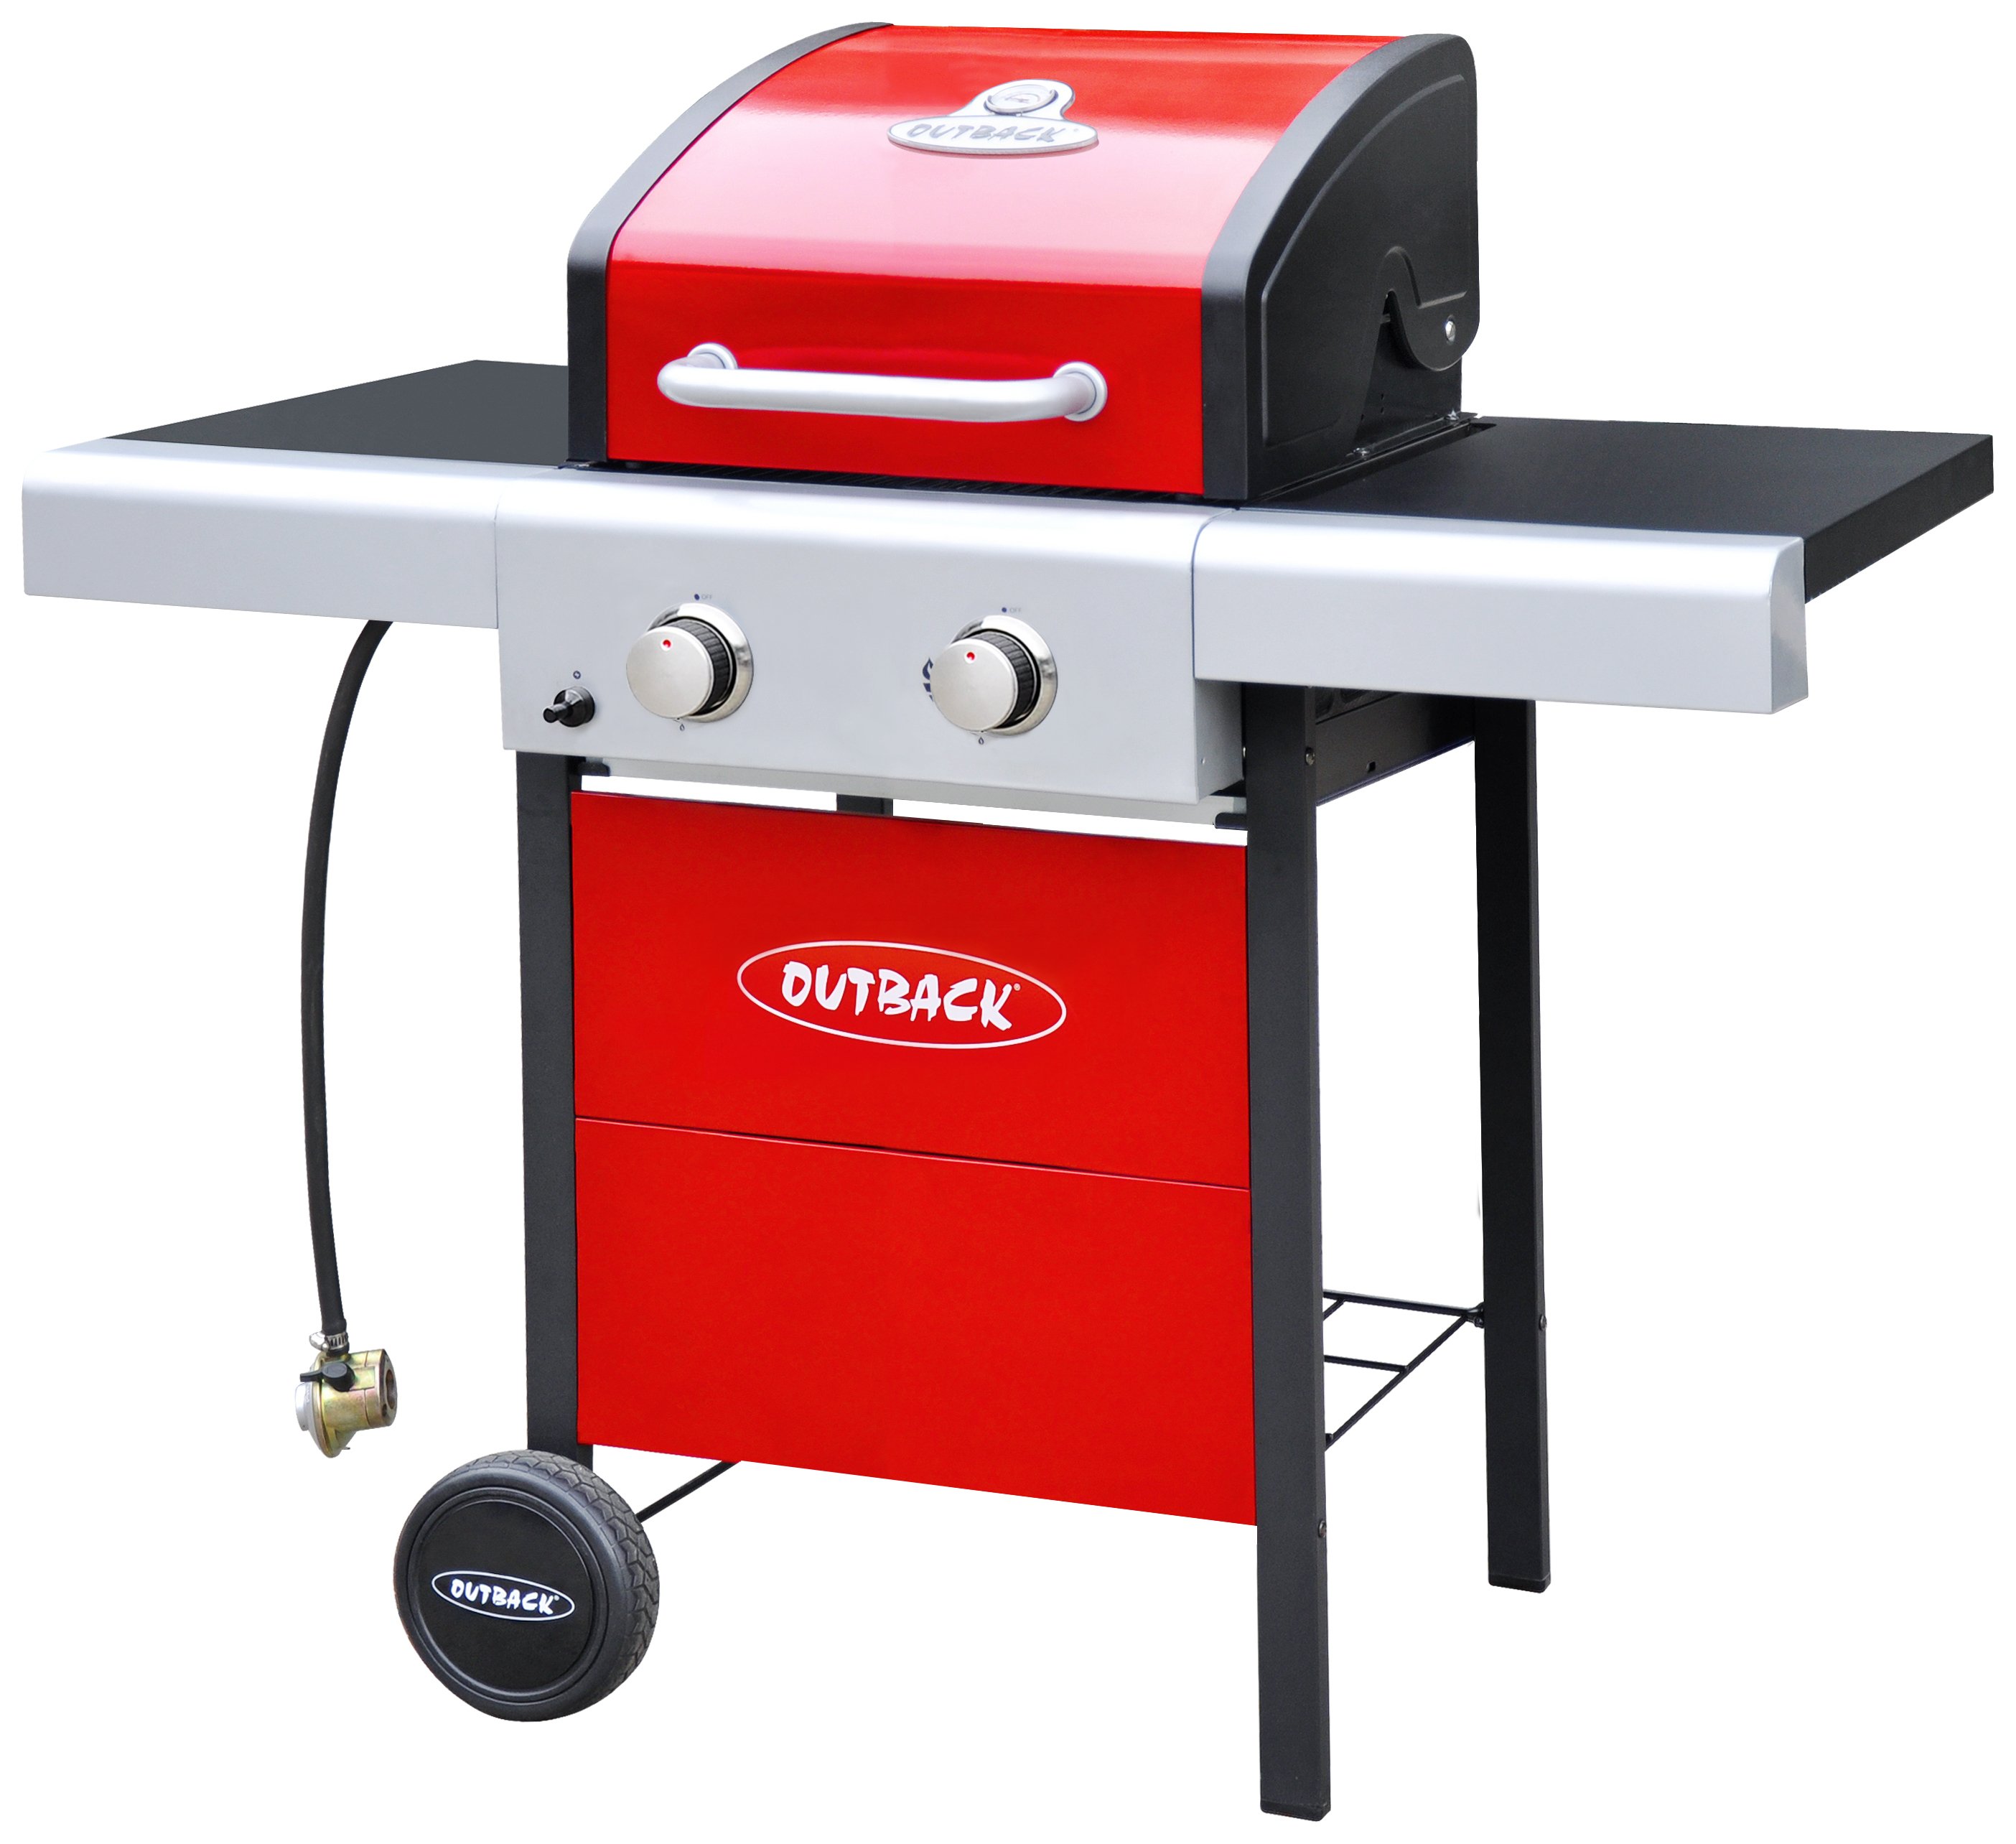 Outback 2 Burner Gas BBQ with Cover - Red